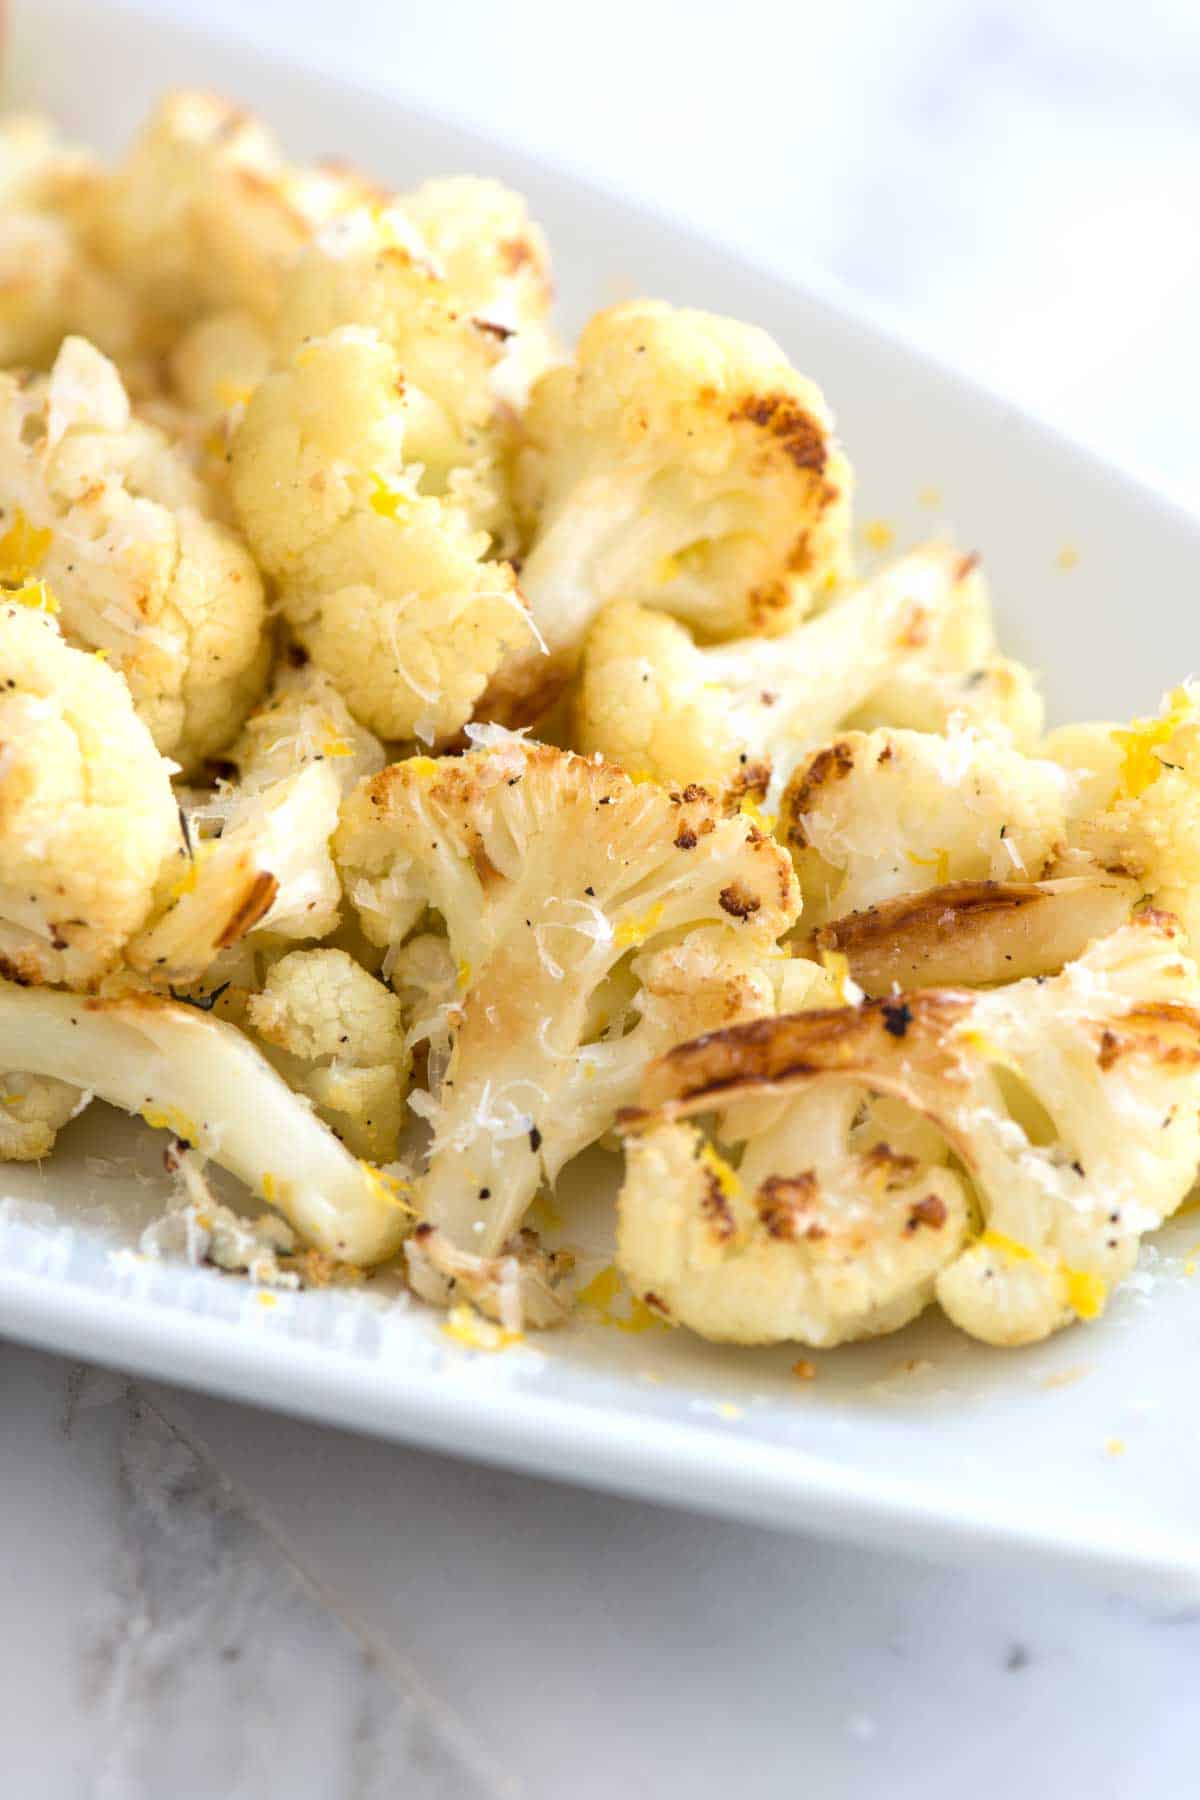 How to Bake Cauliflower in the Oven // Parmesan Lemon roasted cauliflower is one of the tastiest ways to cook cauliflower! See how we turn boring cauliflower into perfectly tender and browned cauliflower.